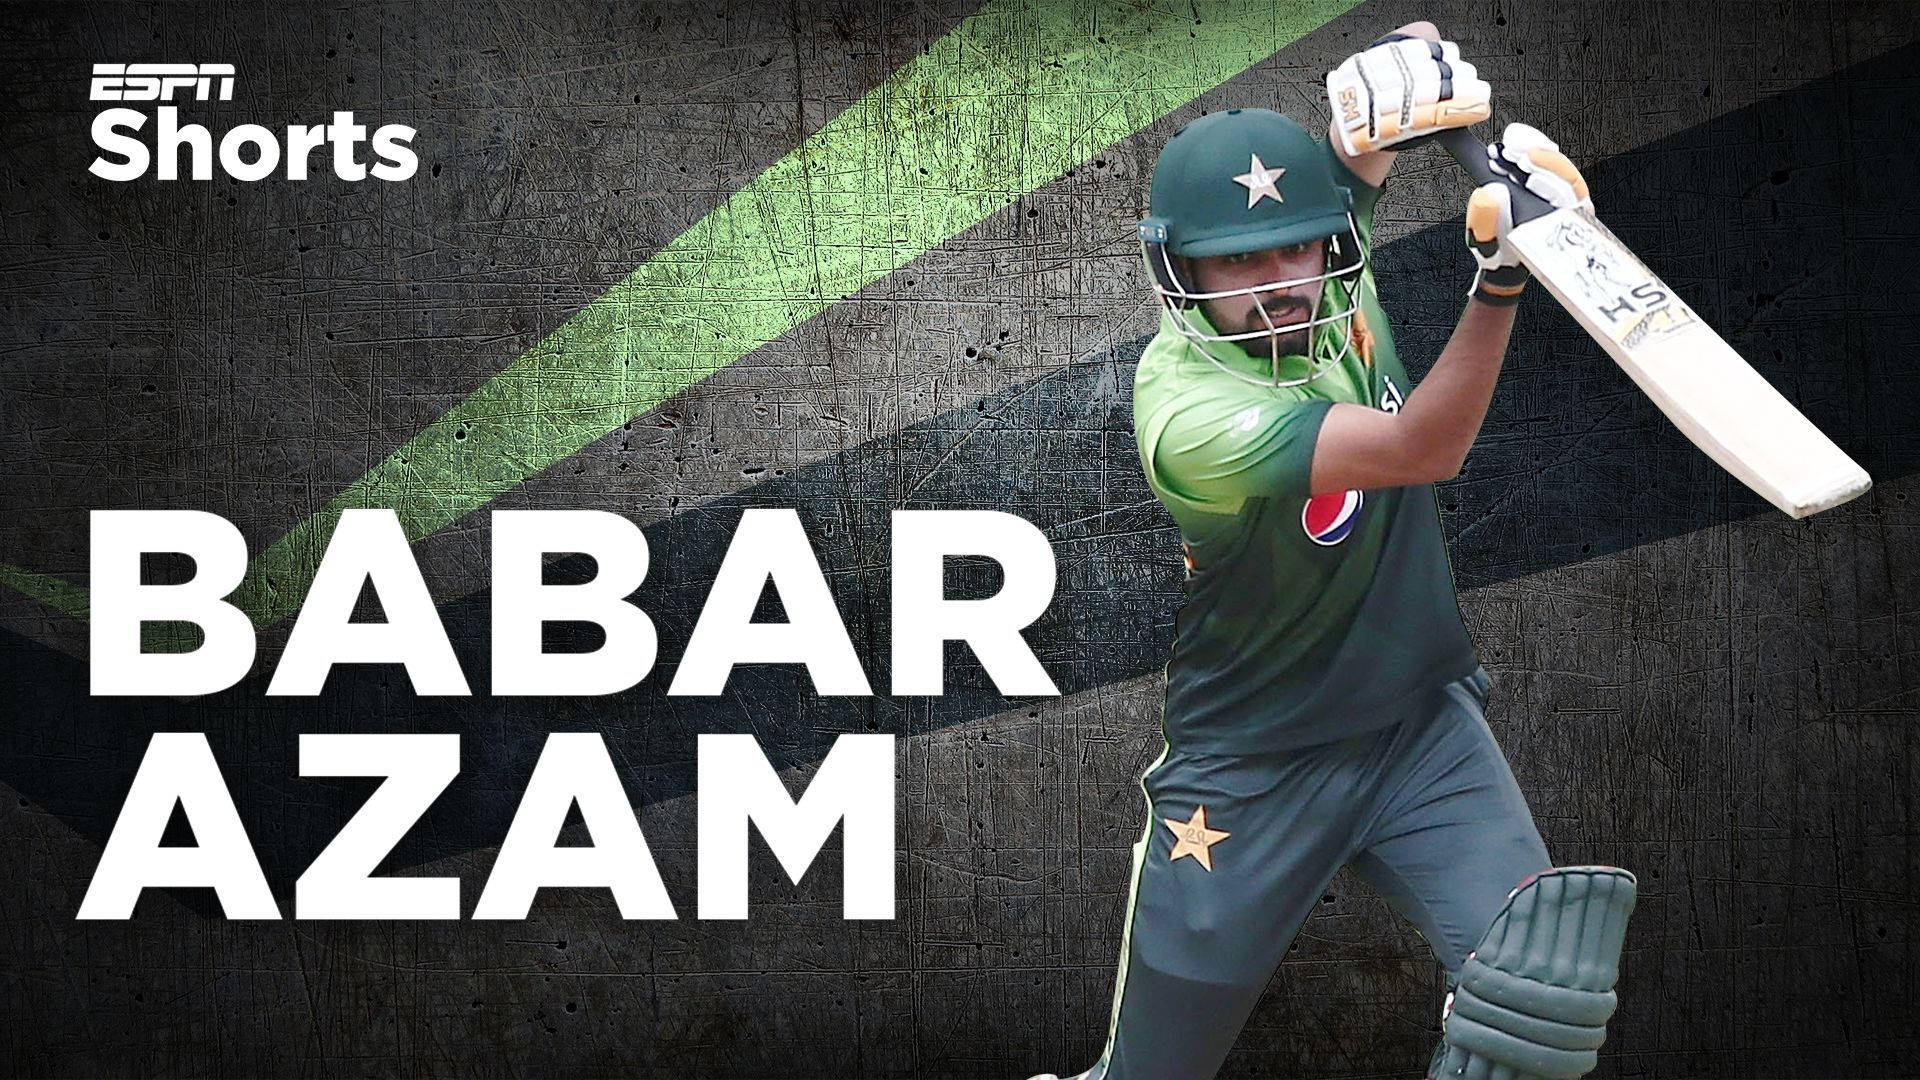 Babar Azam Asia Cup Poster Background